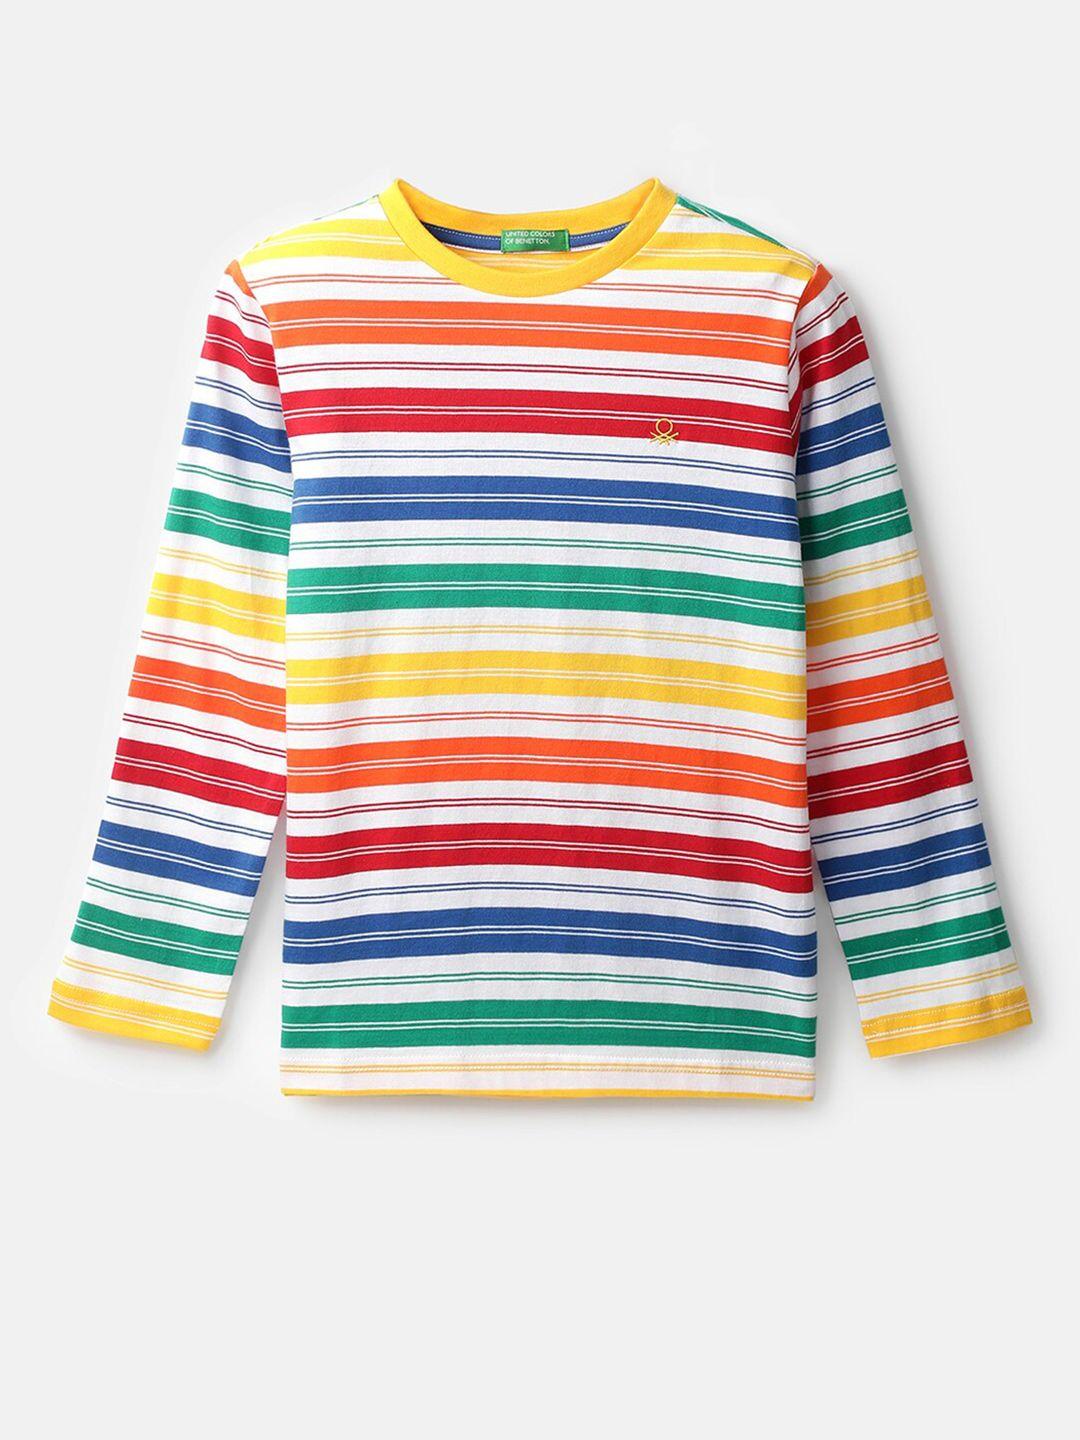 united colors of benetton boys yellow & red cotton striped t-shirt